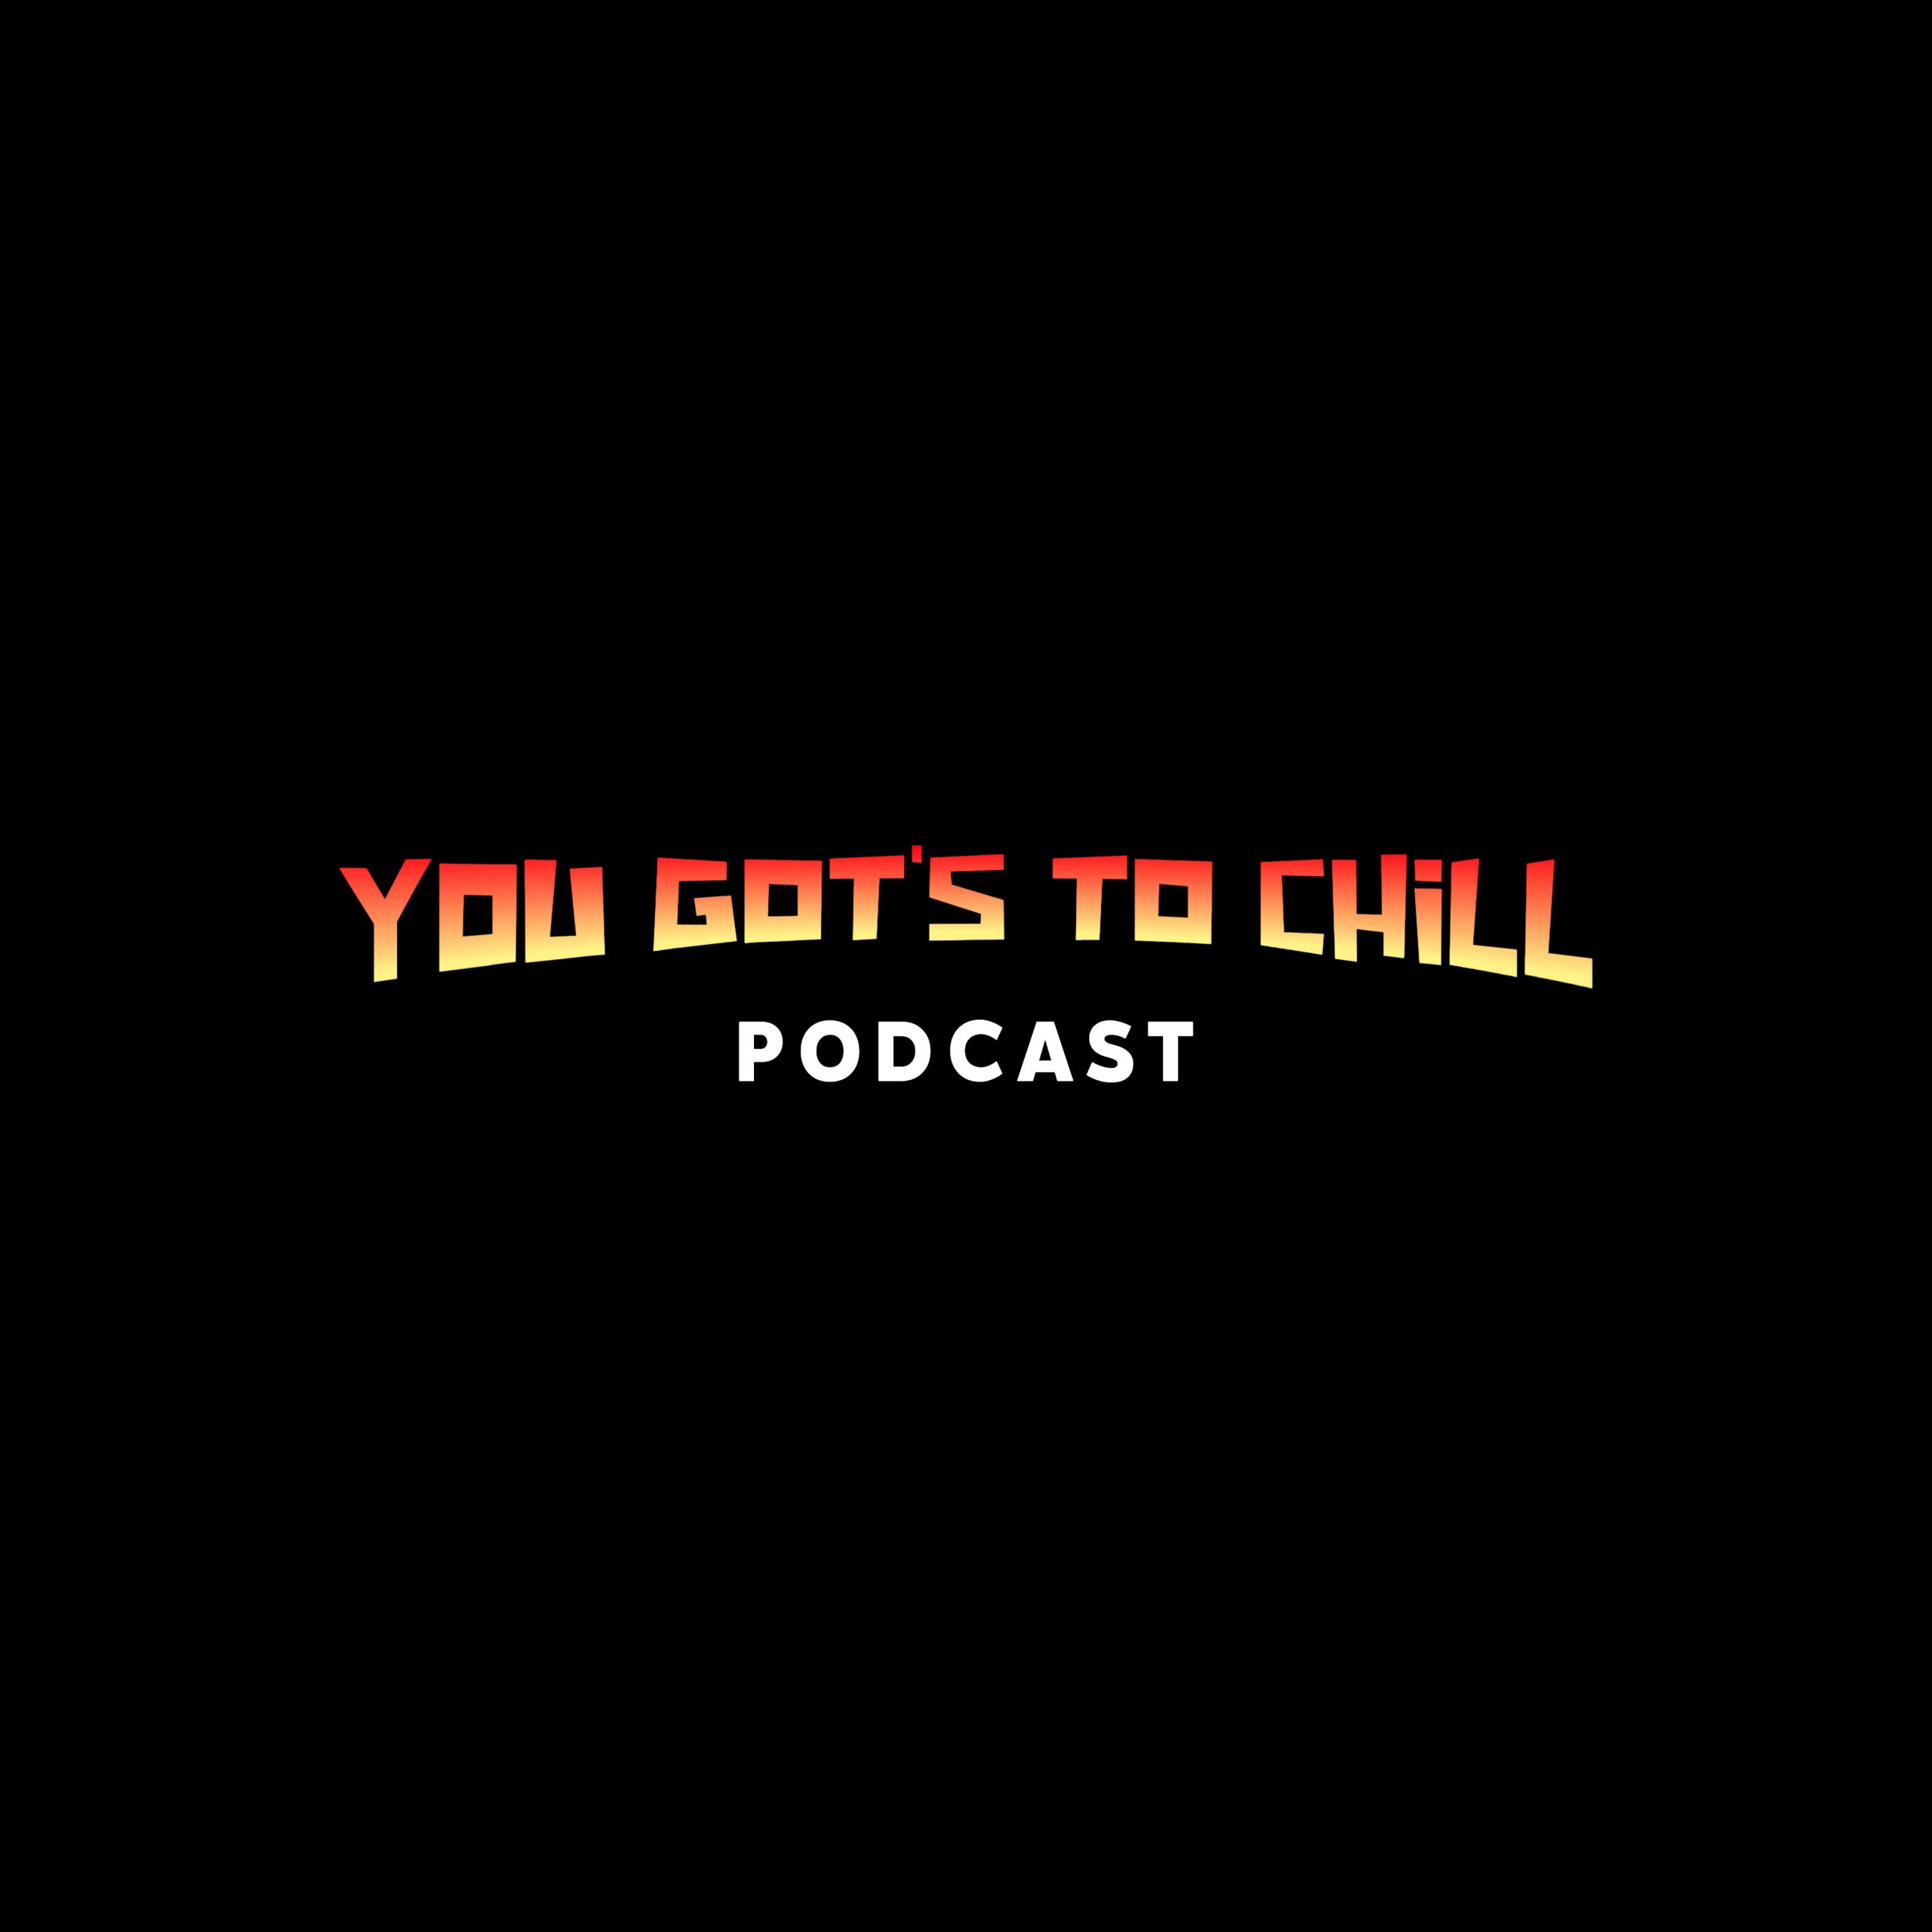 Teenage Drinking Stories, Shitting On Yourself (LOL), And More!!! | You Got’s To Chill Podcast